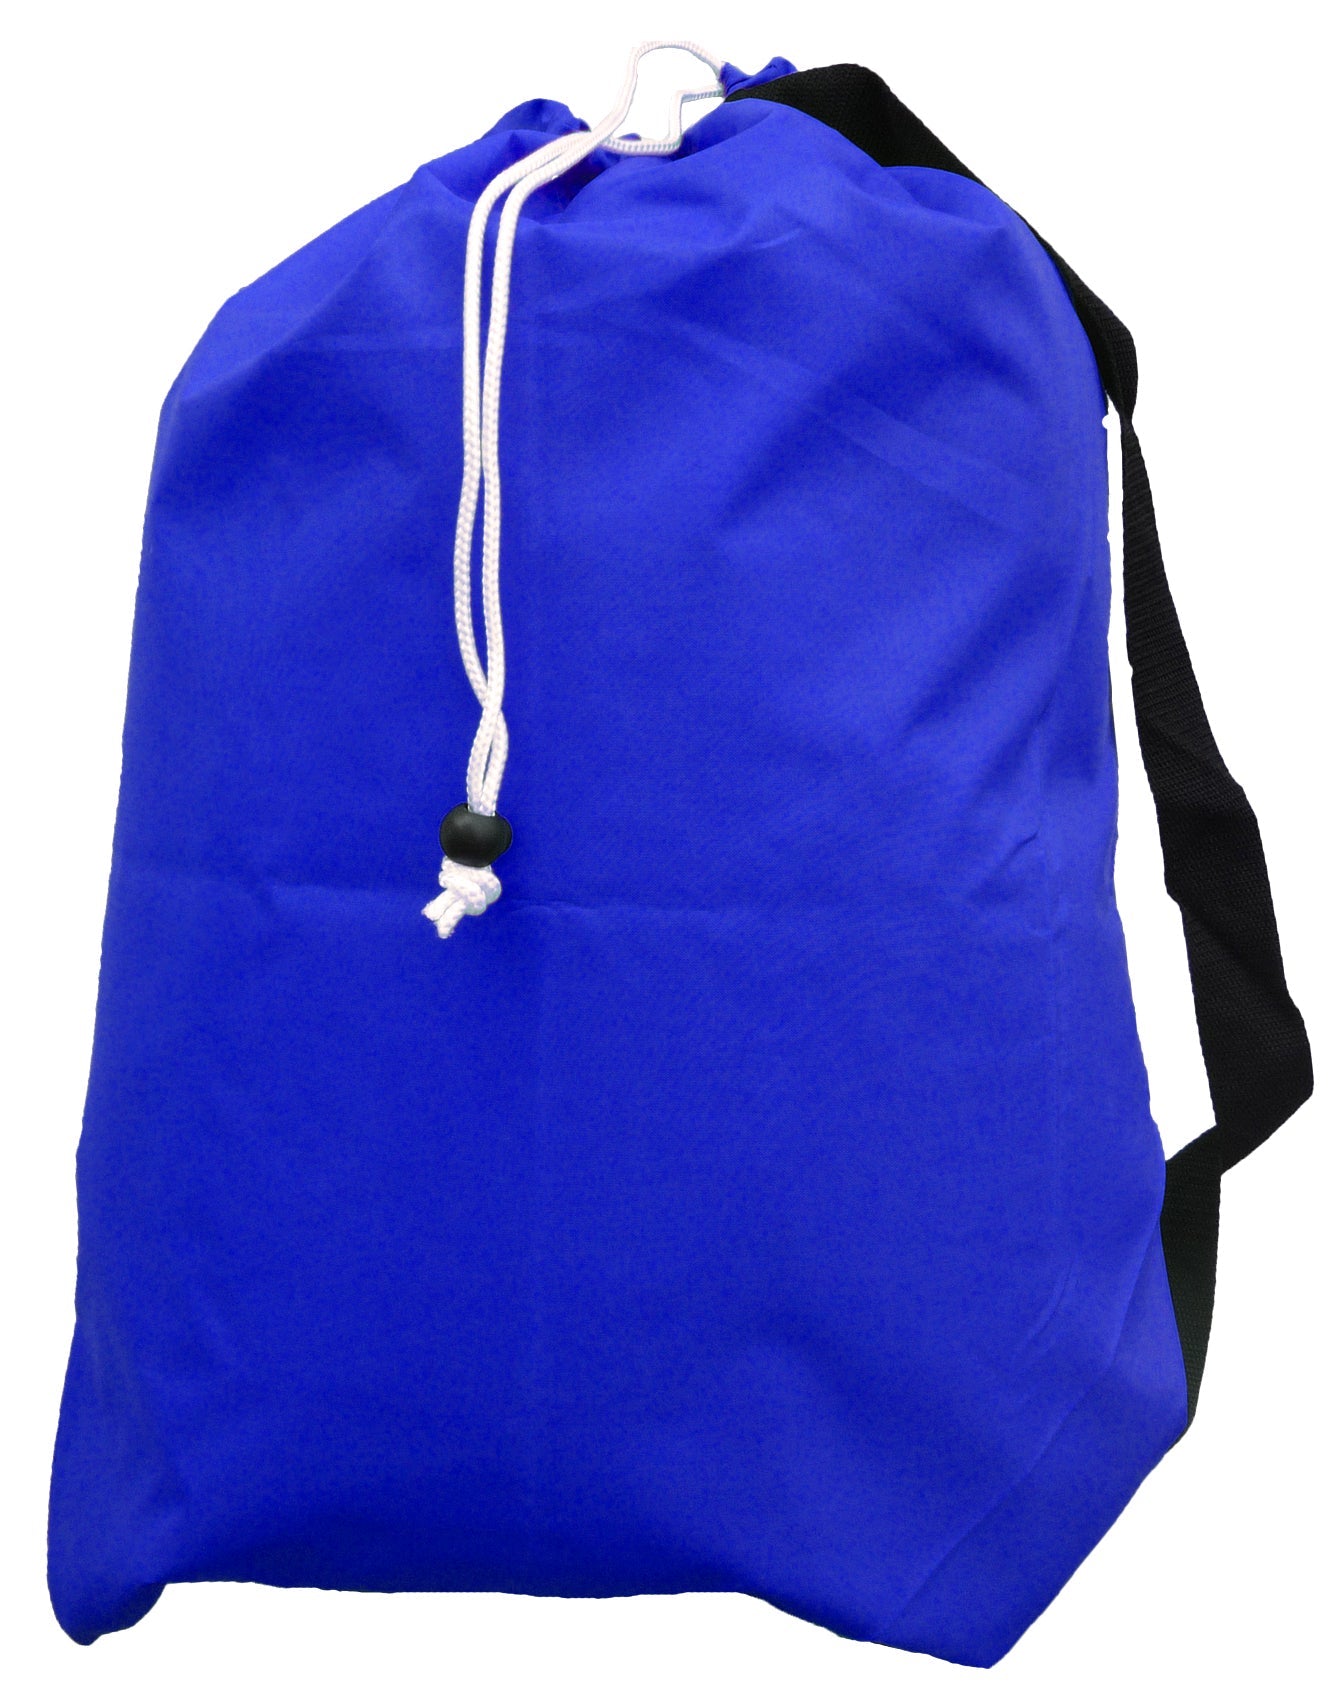 Small Laundry Bag with Strap, Royal Blue